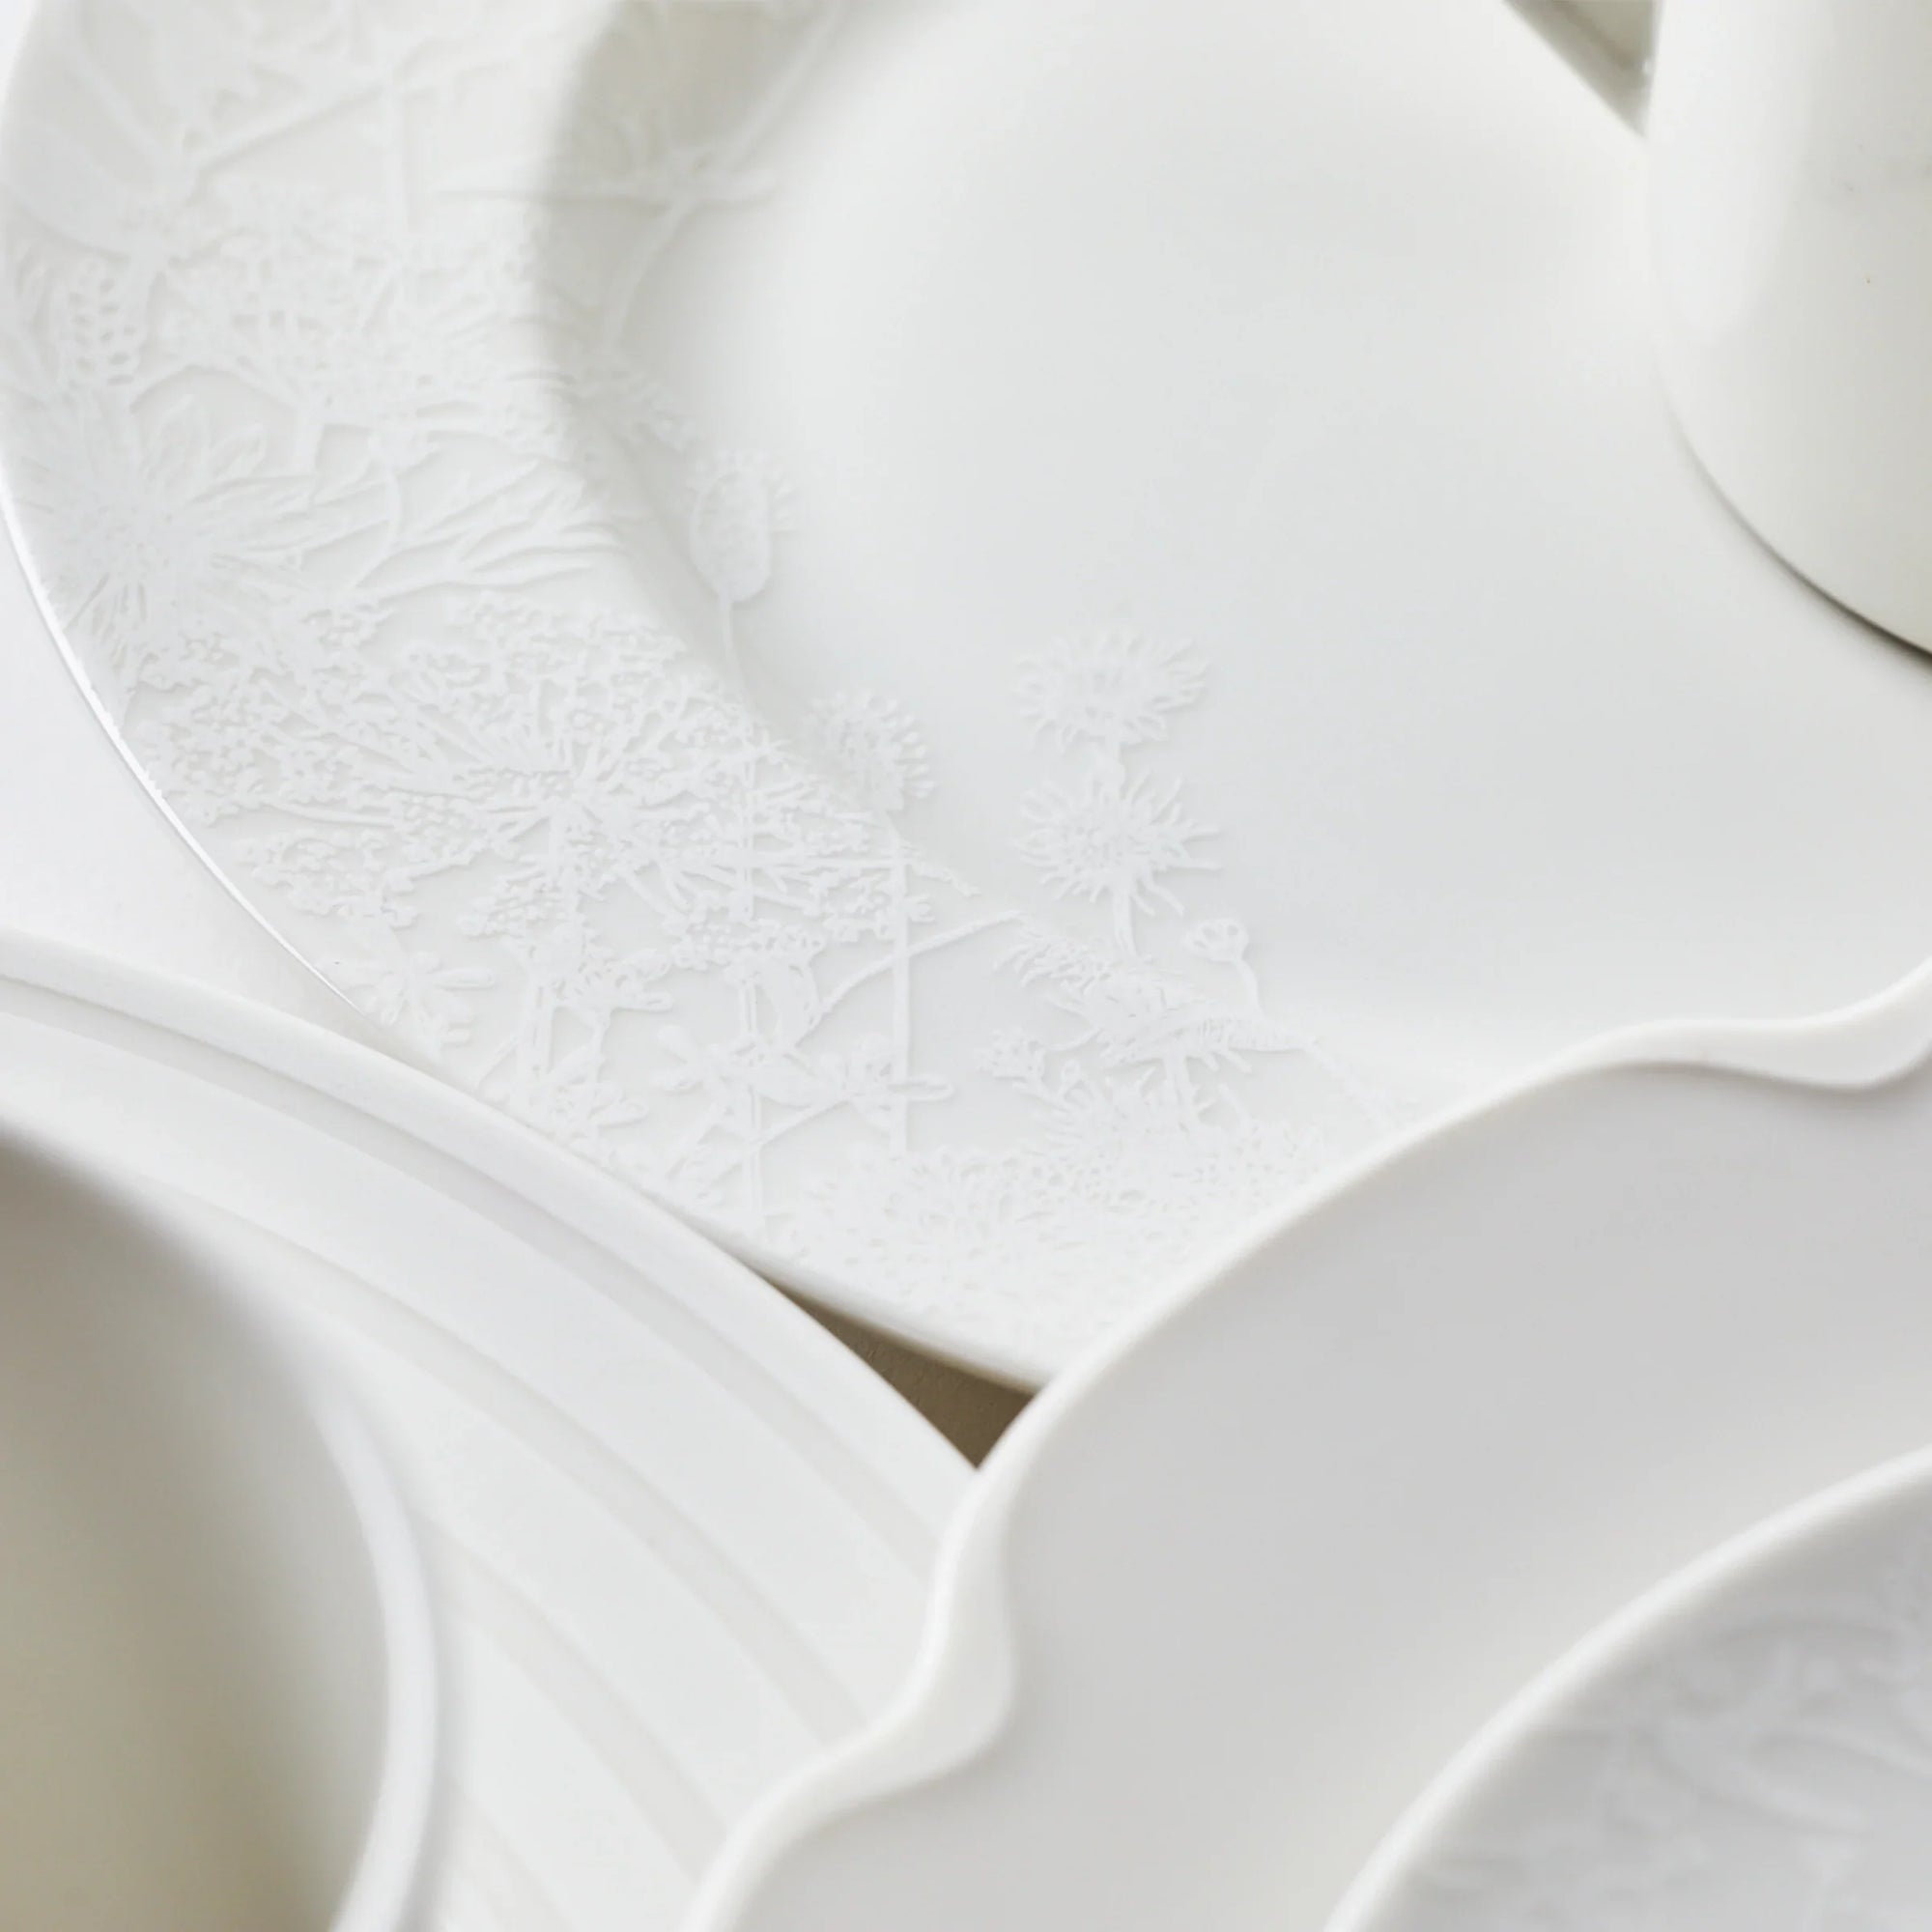 A group of white plates and cups.